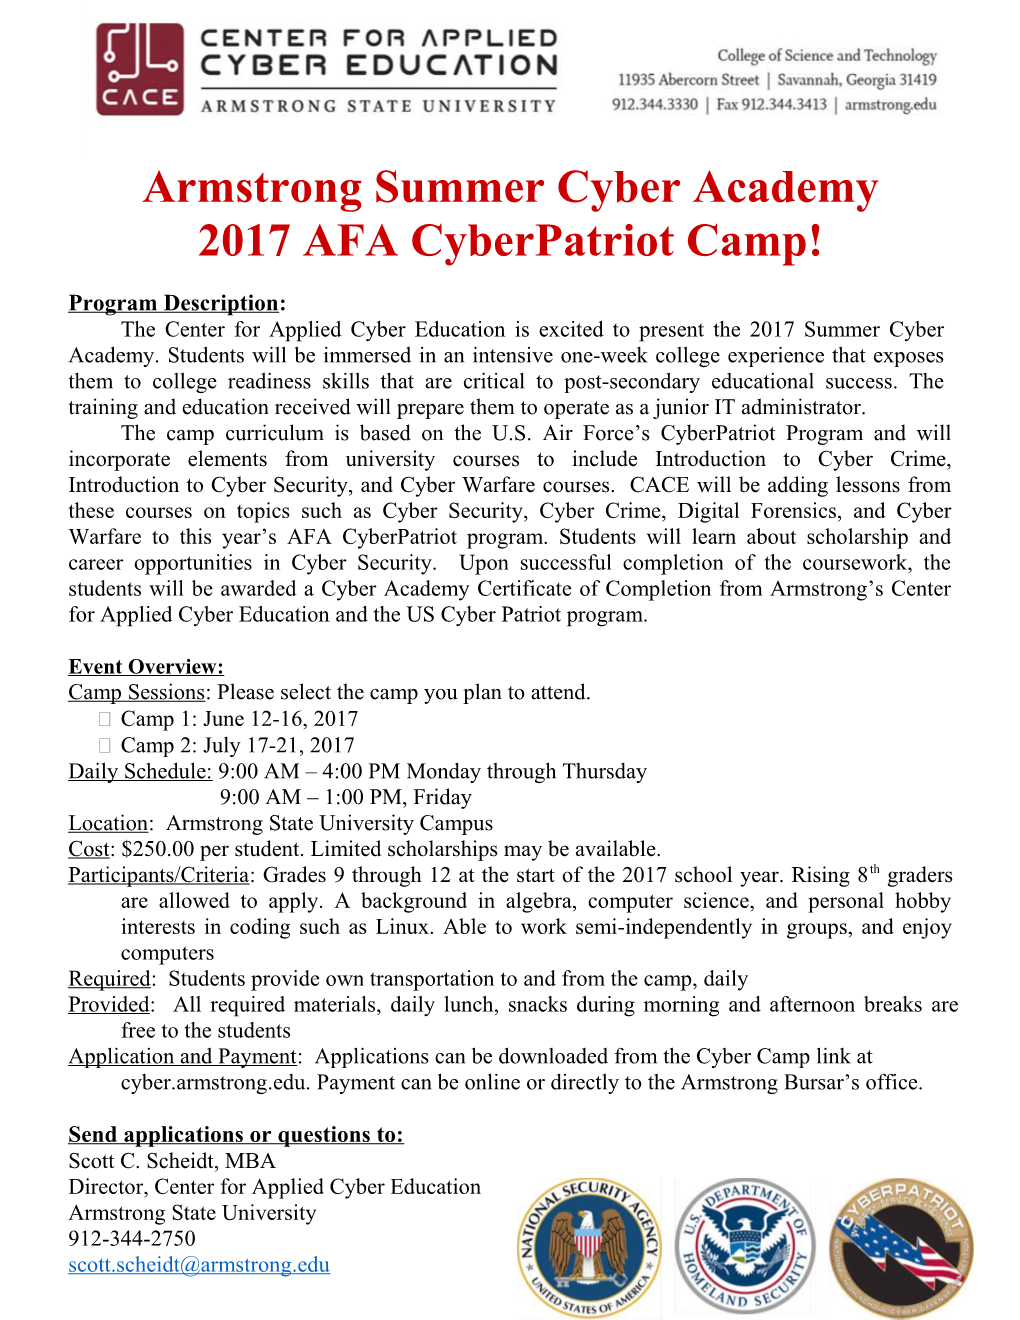 Armstrong Summer Cyber Academy 2017 AFA Cyberpatriot Camp!